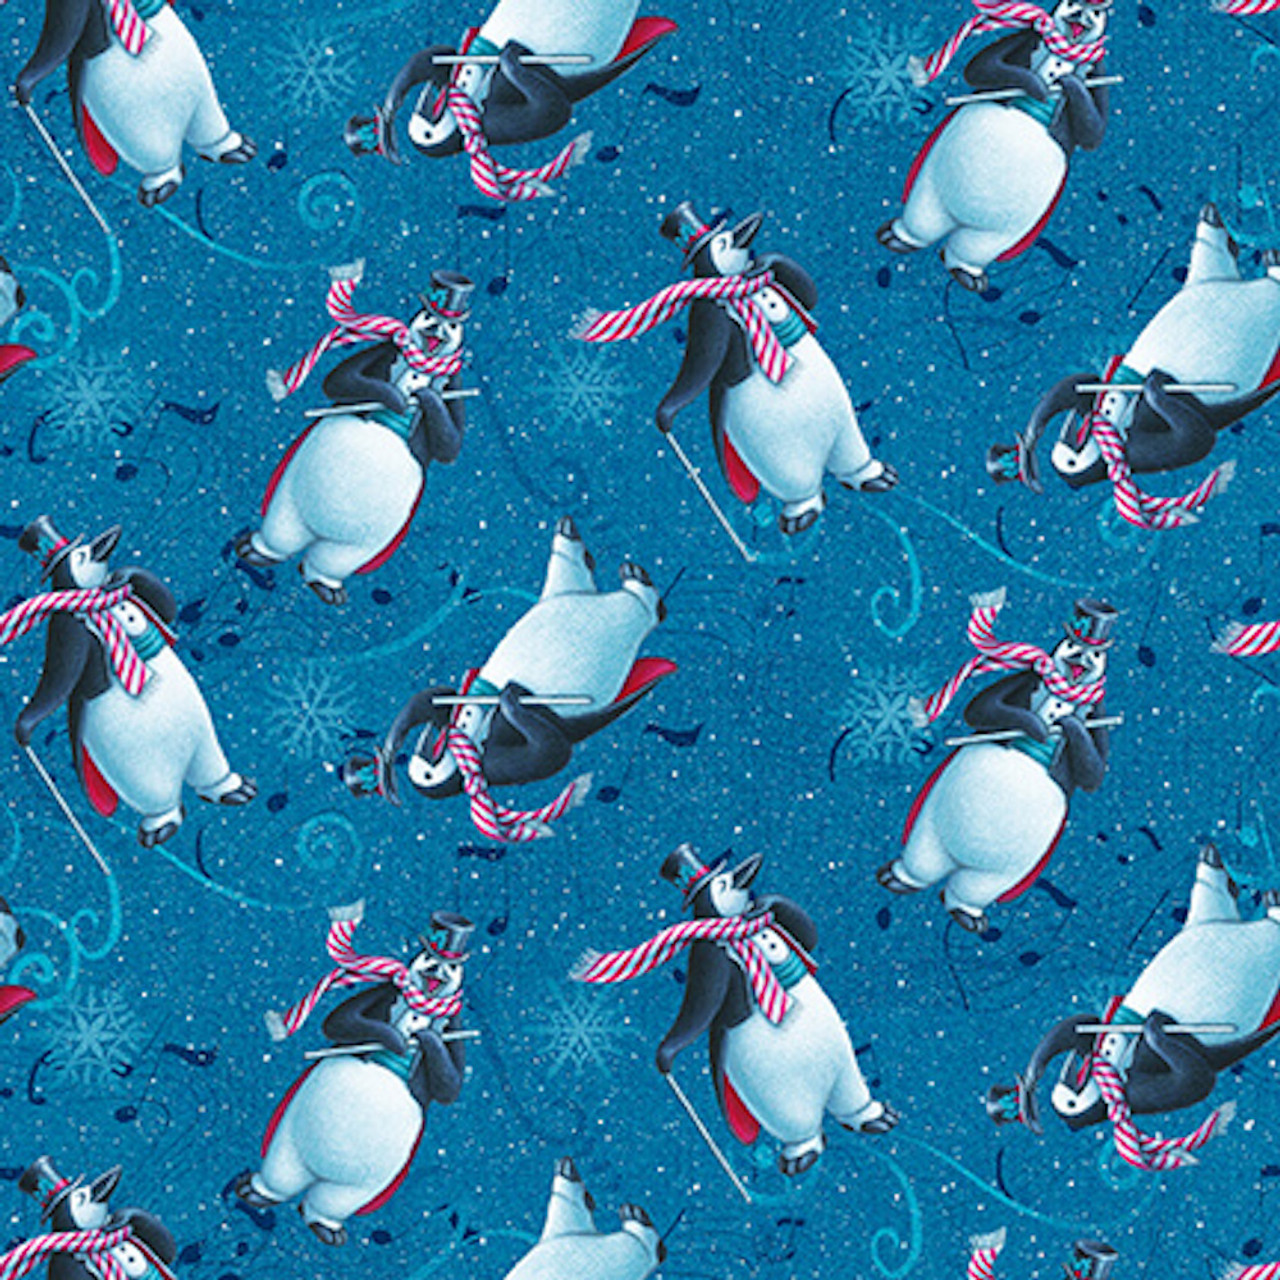 StudioE 12 Days Of Christmas Penguins Cyan Cotton Fabric By The Yard